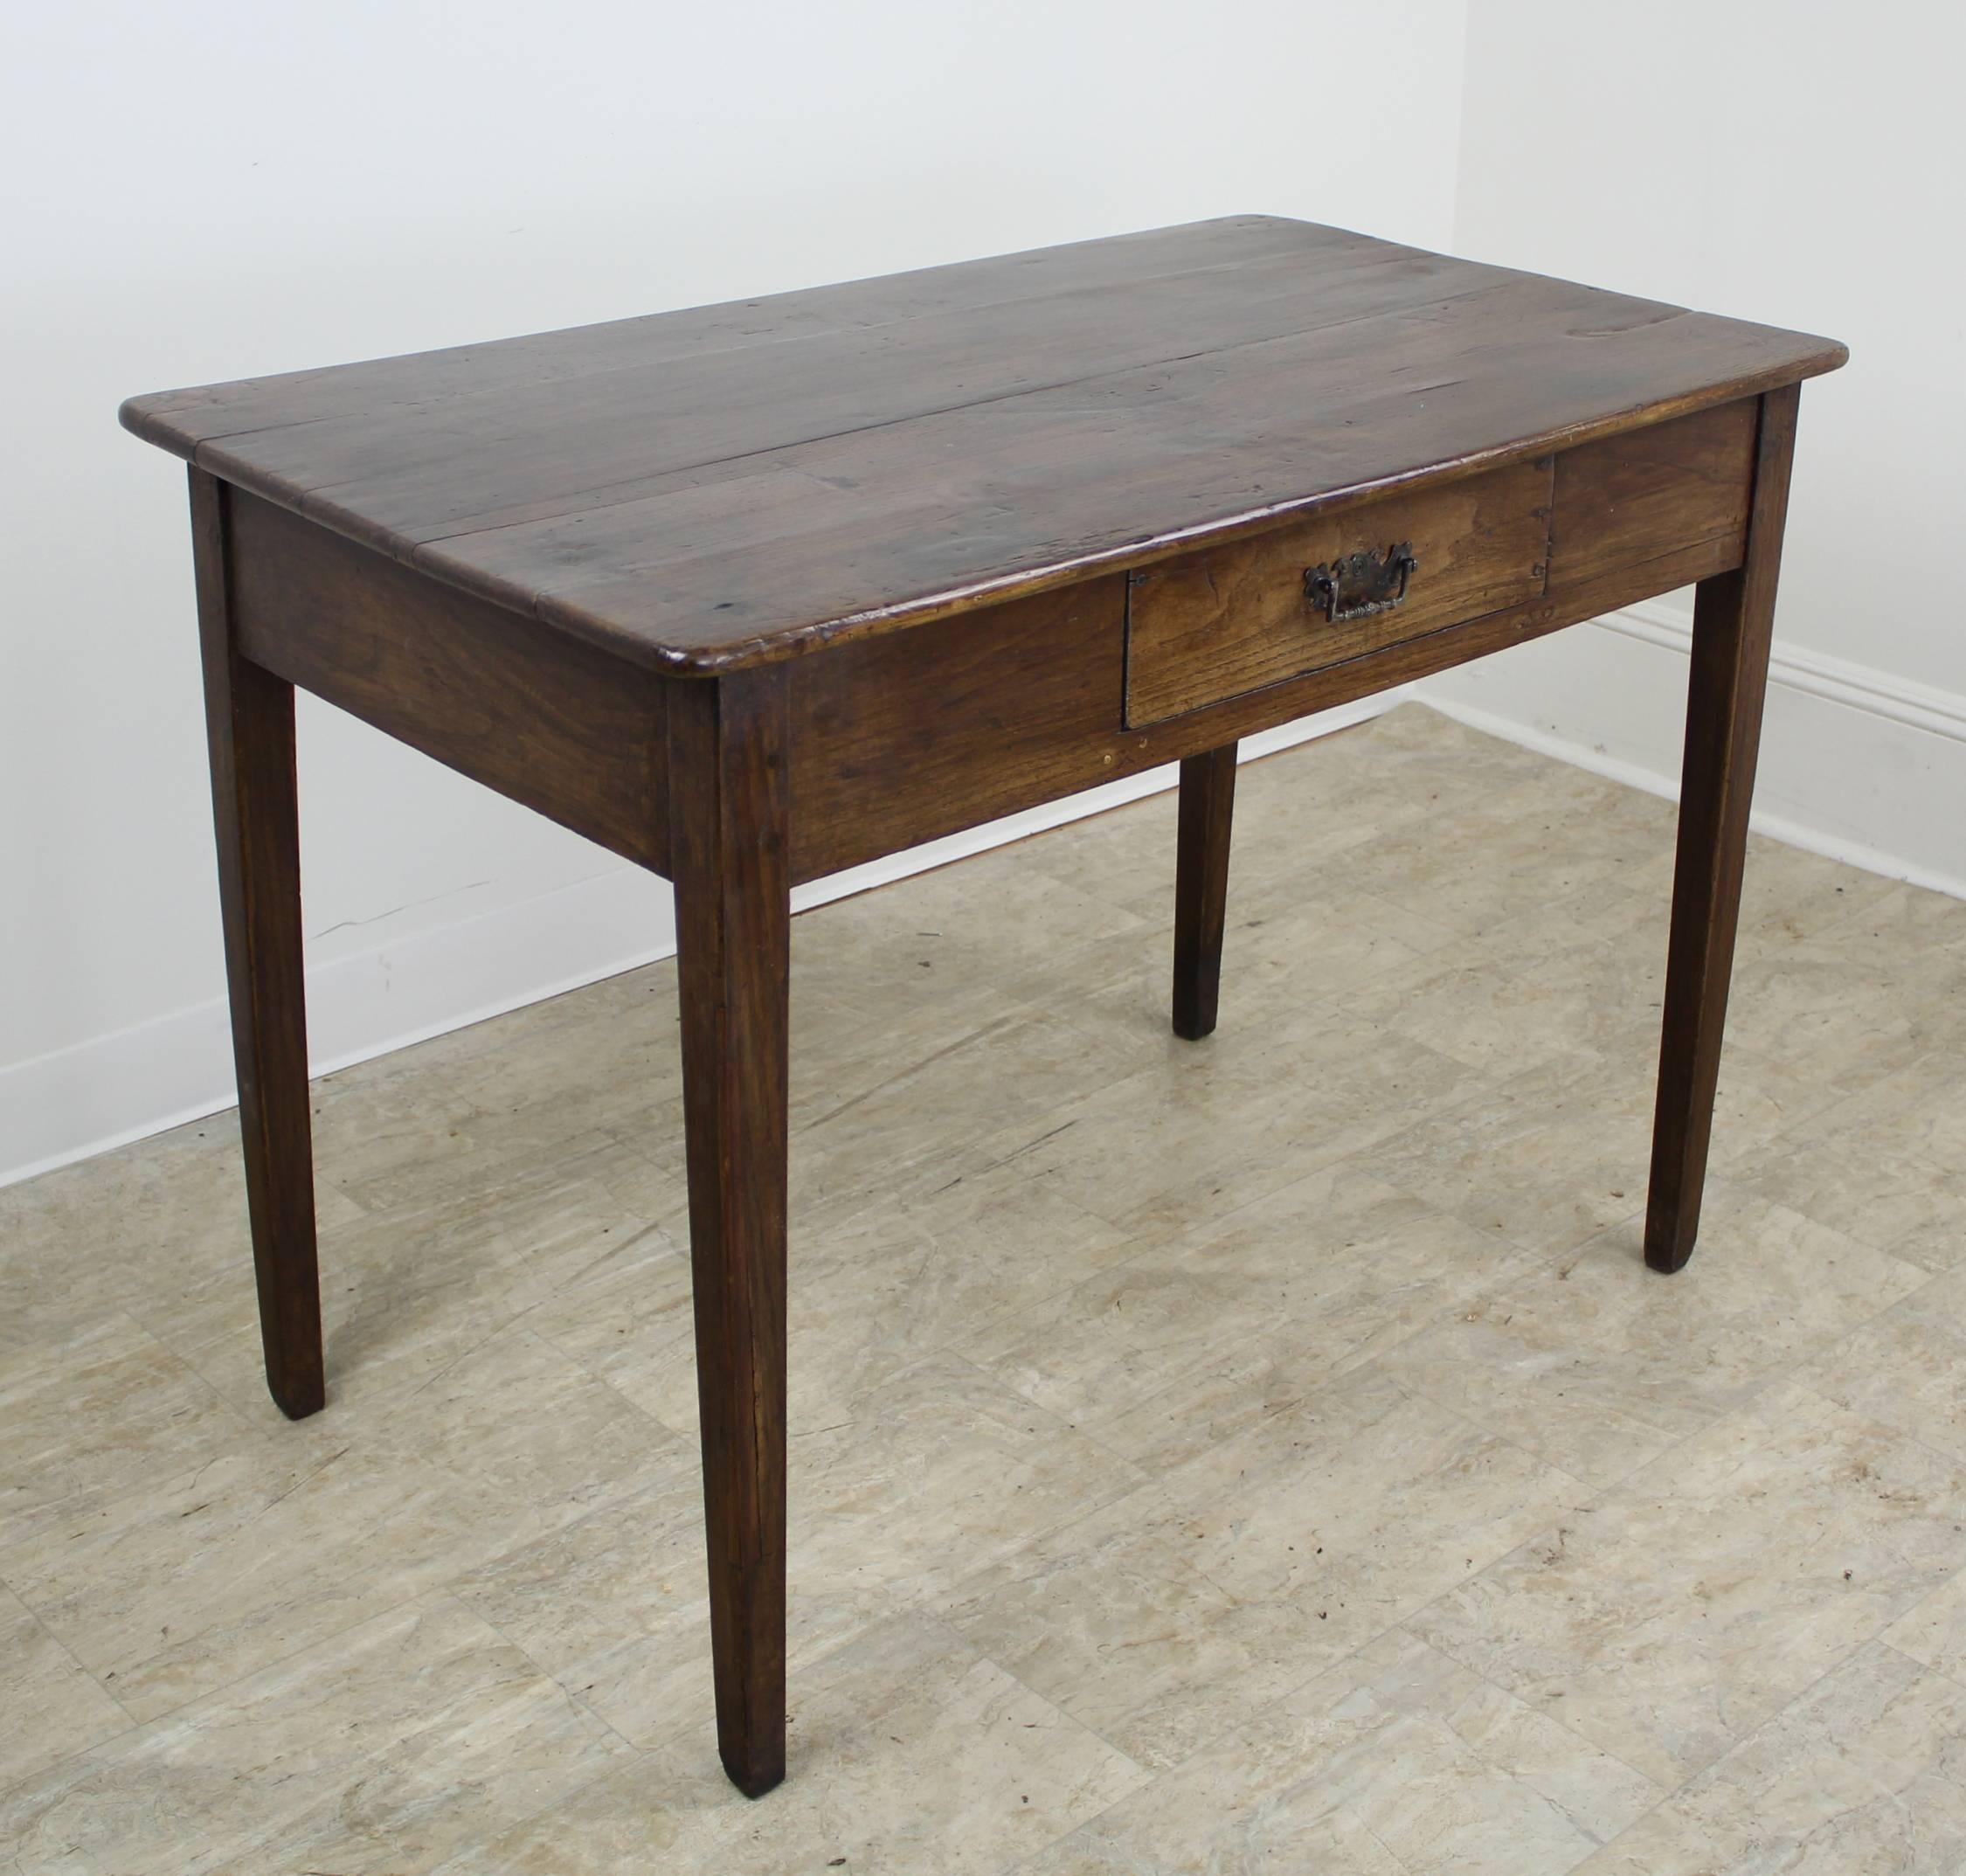 A great country looks in a good medium to large size desk. Handsome dark oak with an excellent patina. One drawer with decorative, ornate pull. Classic tapered legs. Charming piece. Apron height is 24" allowing good knee room.